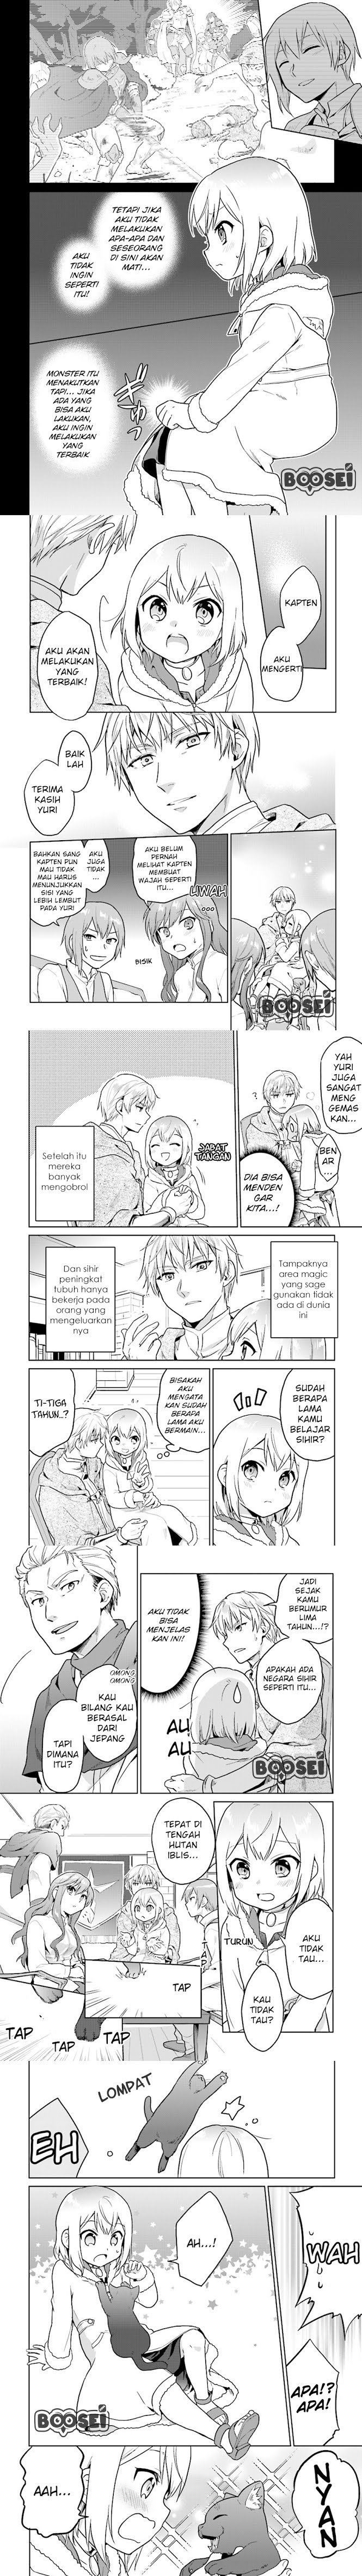 Dilarang COPAS - situs resmi www.mangacanblog.com - Komik the small sage will try her best in the different world from lv 1 007 - chapter 7 8 Indonesia the small sage will try her best in the different world from lv 1 007 - chapter 7 Terbaru 4|Baca Manga Komik Indonesia|Mangacan